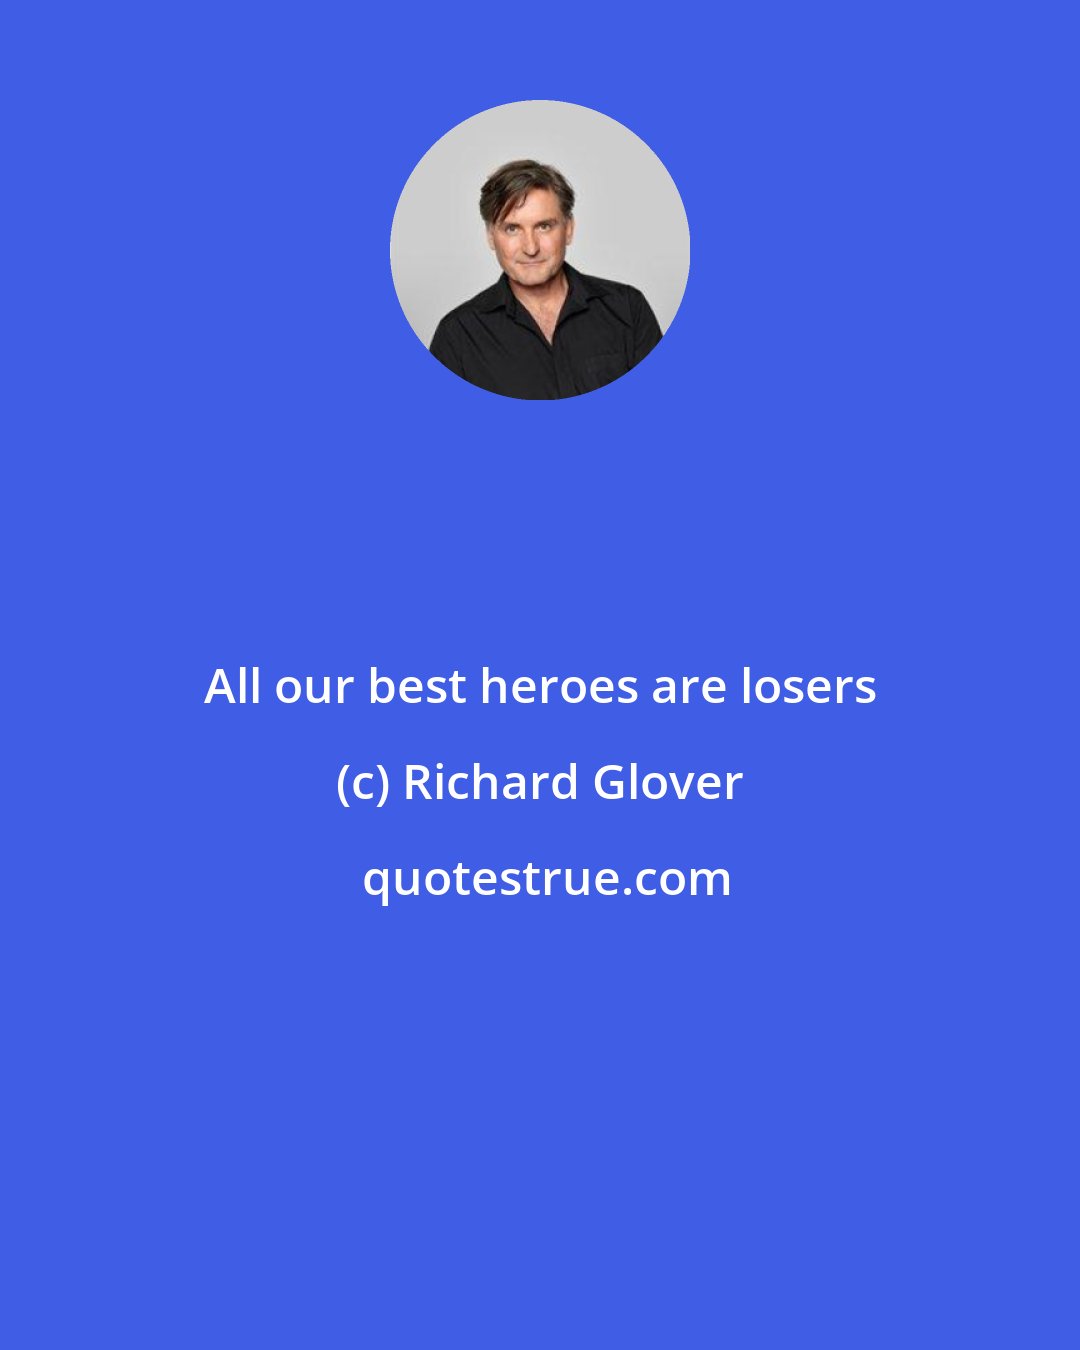 Richard Glover: All our best heroes are losers